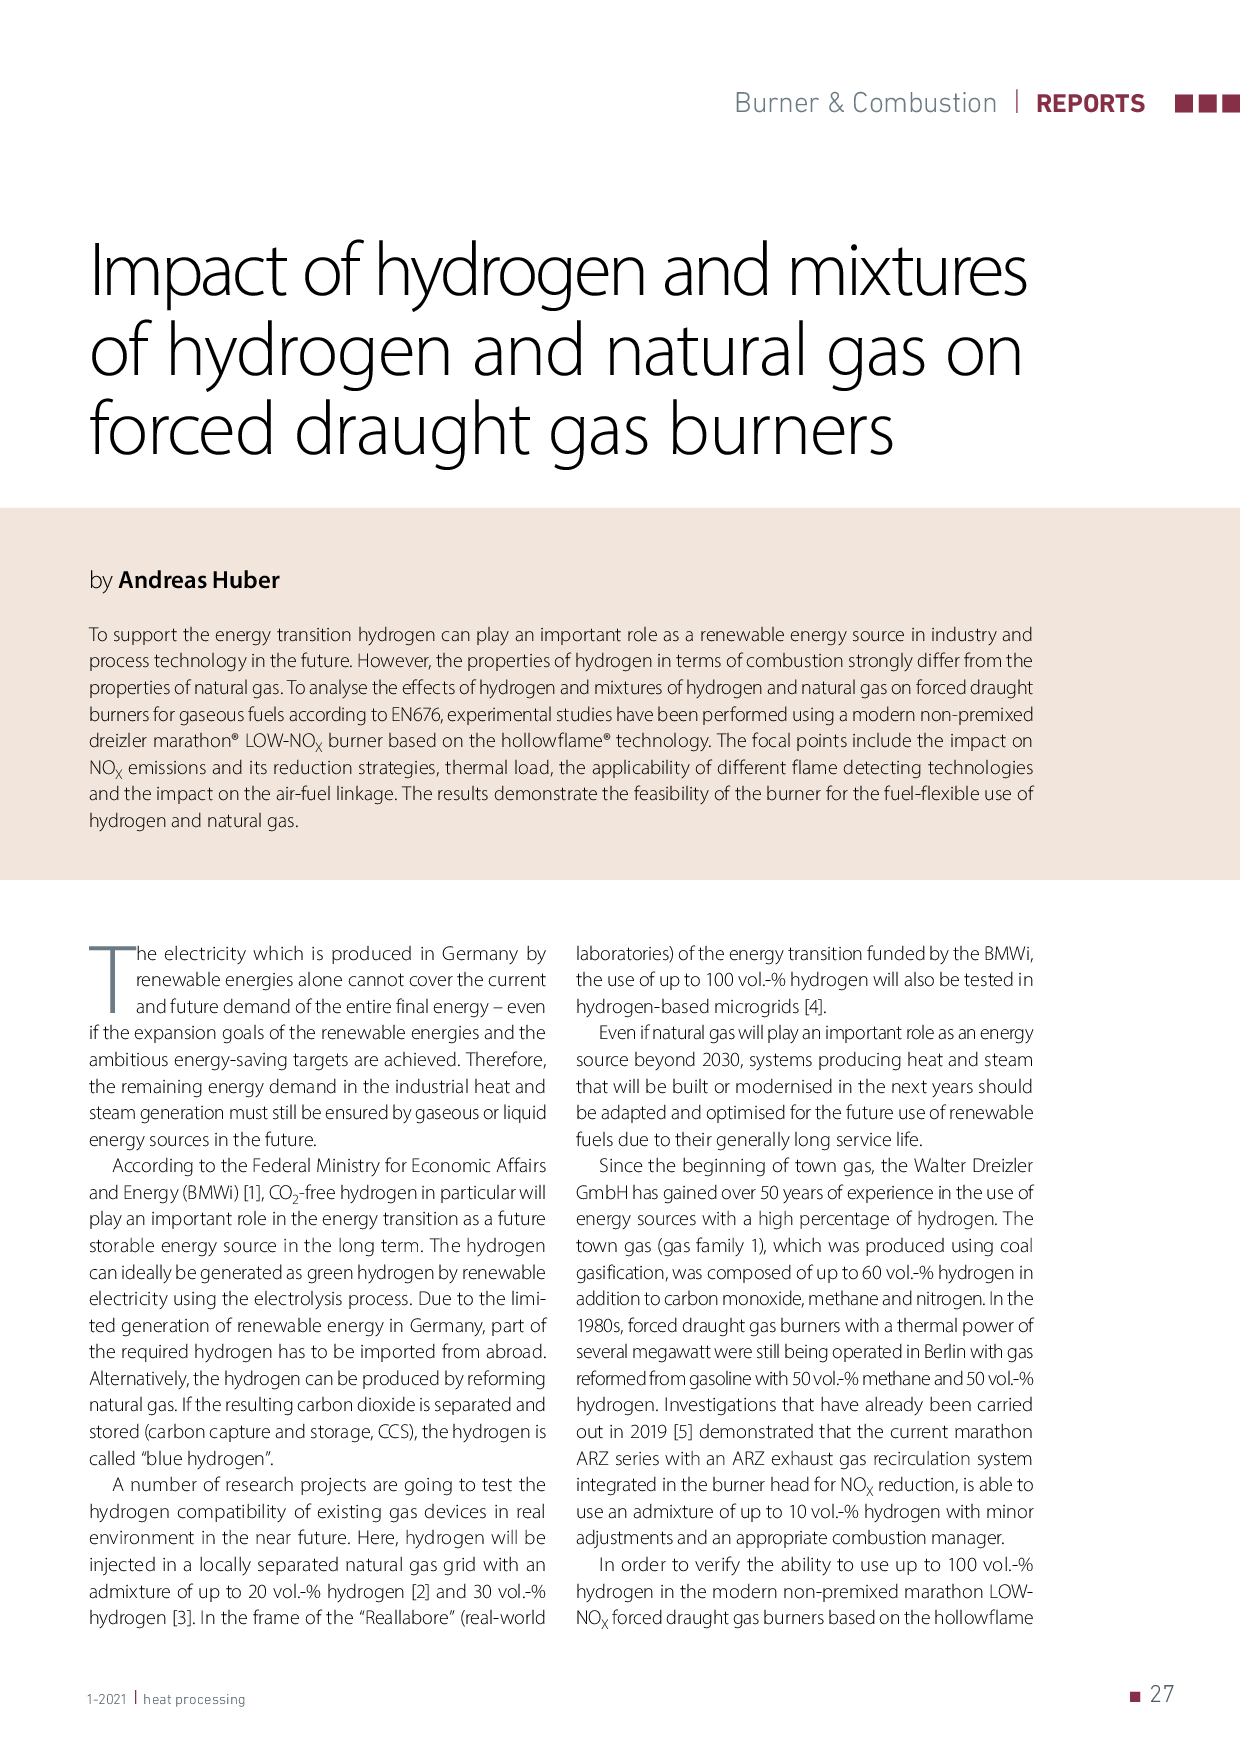 Impact of hydrogen and mixtures of hydrogen and natural gas on forced draught gas burners